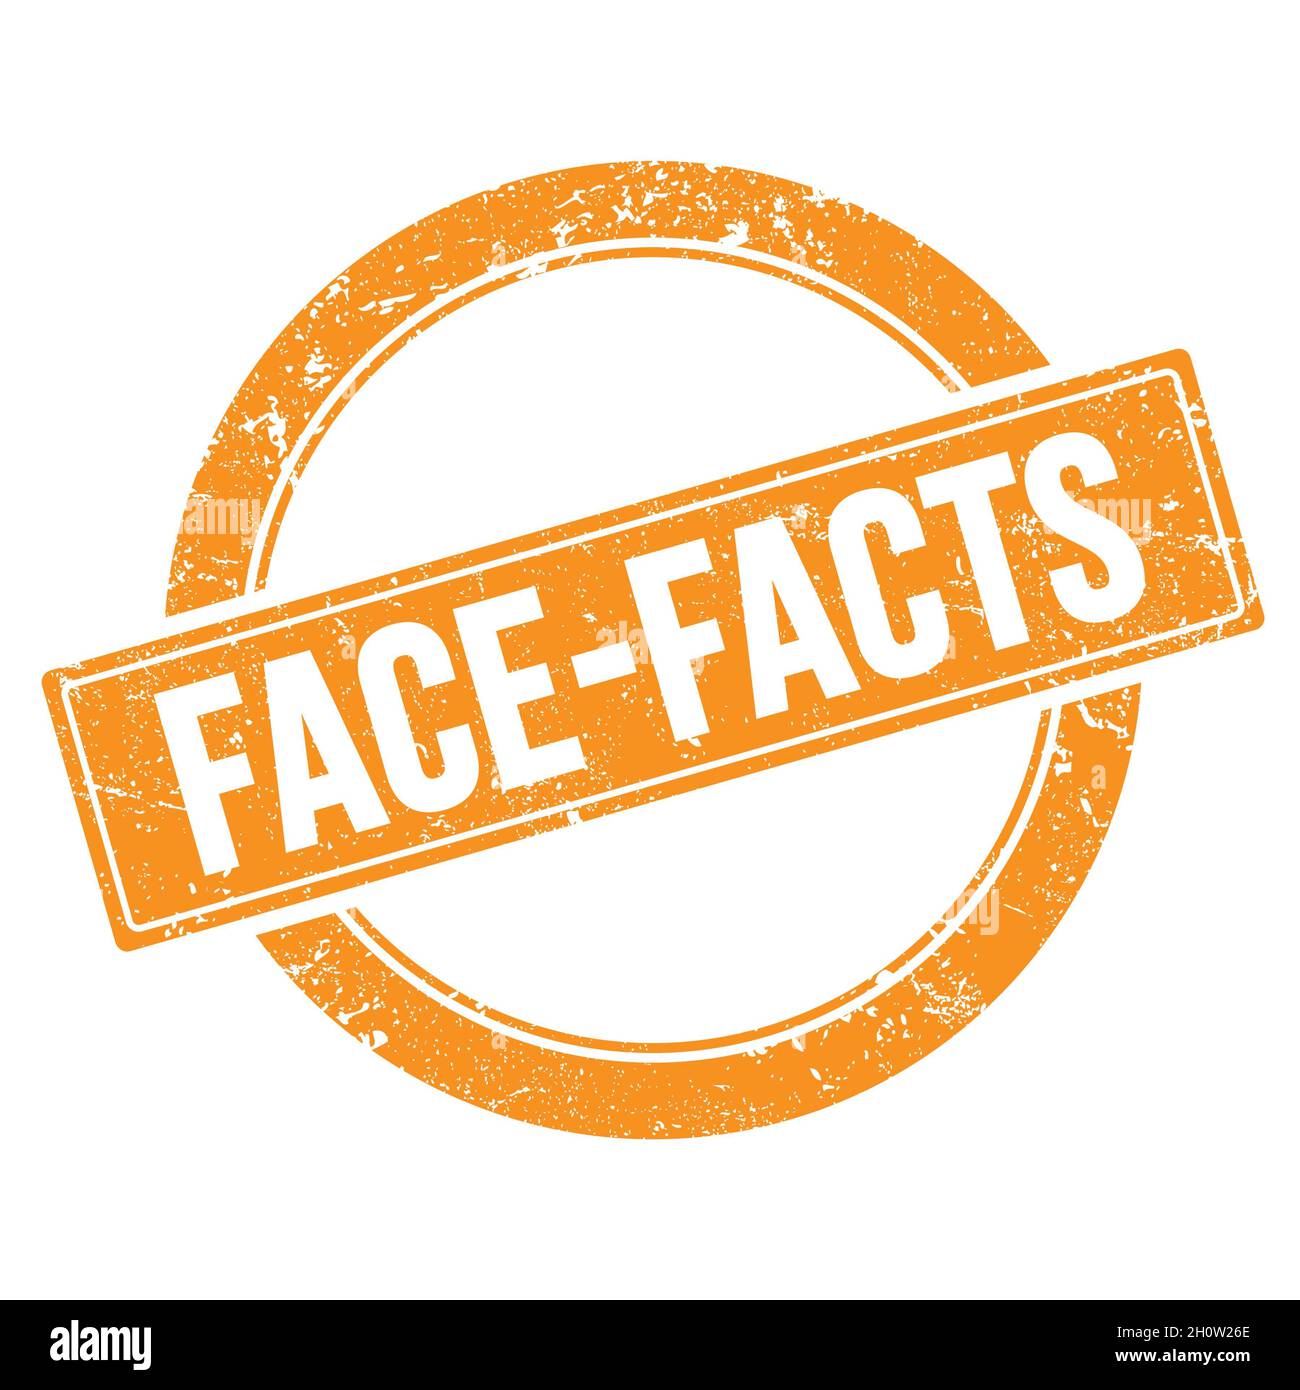 FACE-FACTS text on orange grungy round vintage stamp. Stock Photo